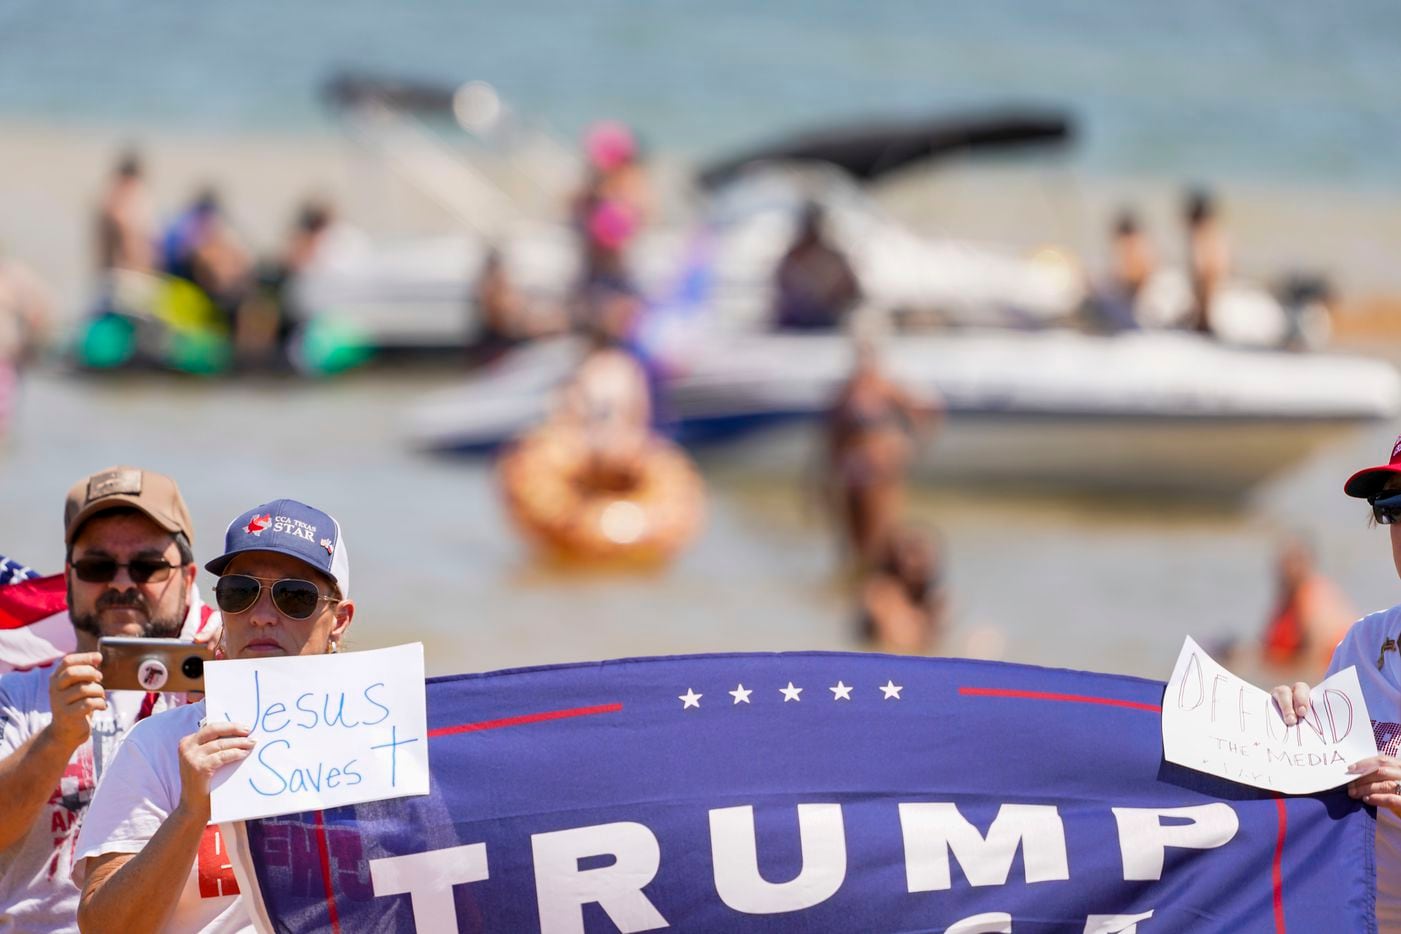 Supporters of President Donald Trump listen as Fabian Cordova Vasquez, candidate for the U.S. House of Representatives 33rd Congressional District, addresses a campaign rally and boat parade at Oak Grove Park on Grapevine Lake on Saturday, Aug. 15, 2020.